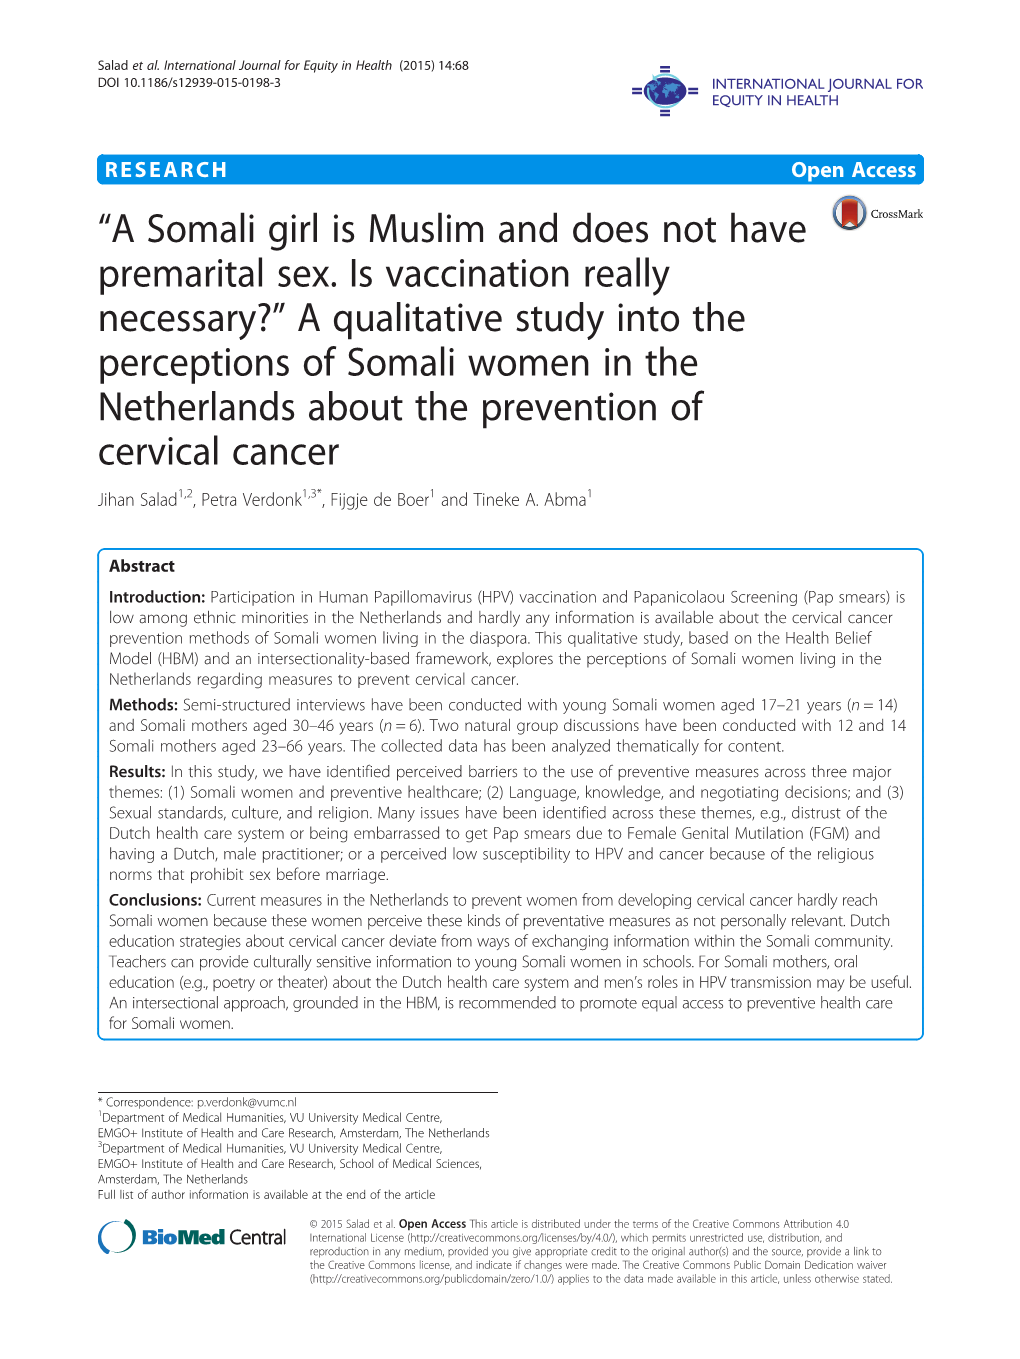 “A Somali Girl Is Muslim and Does Not Have Premarital Sex. Is Vaccination